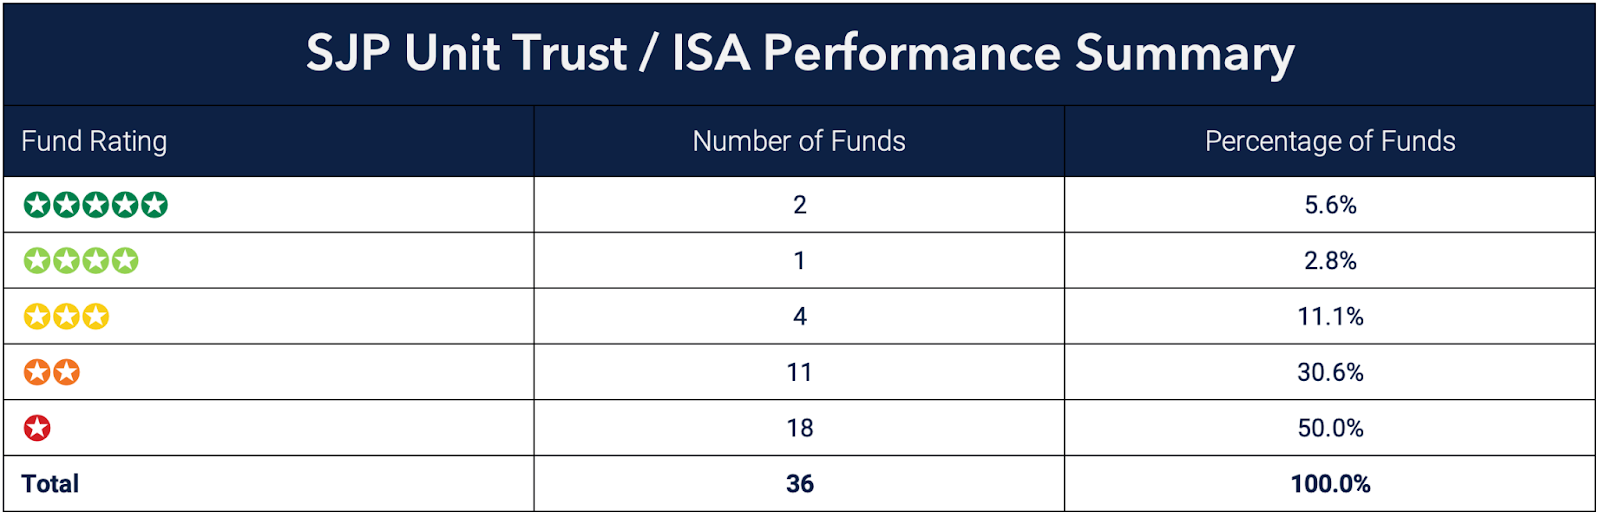 St James's Place fund performance rating